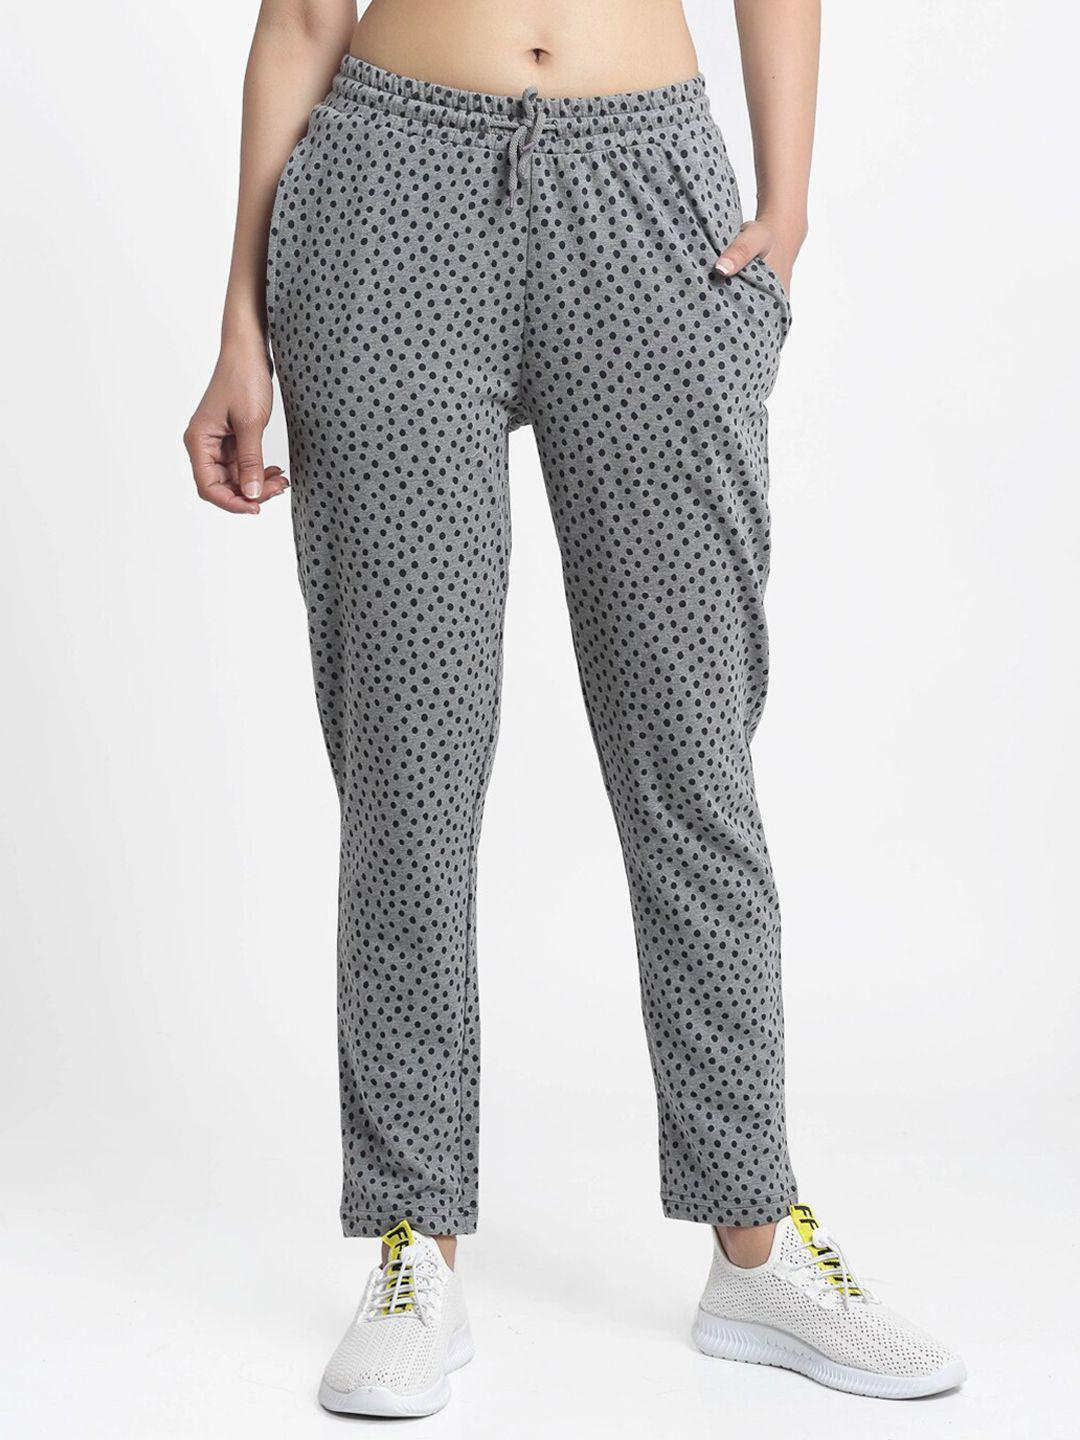 dressberry-women-grey-polka-dots-printed-relaxed-fit-track-pant